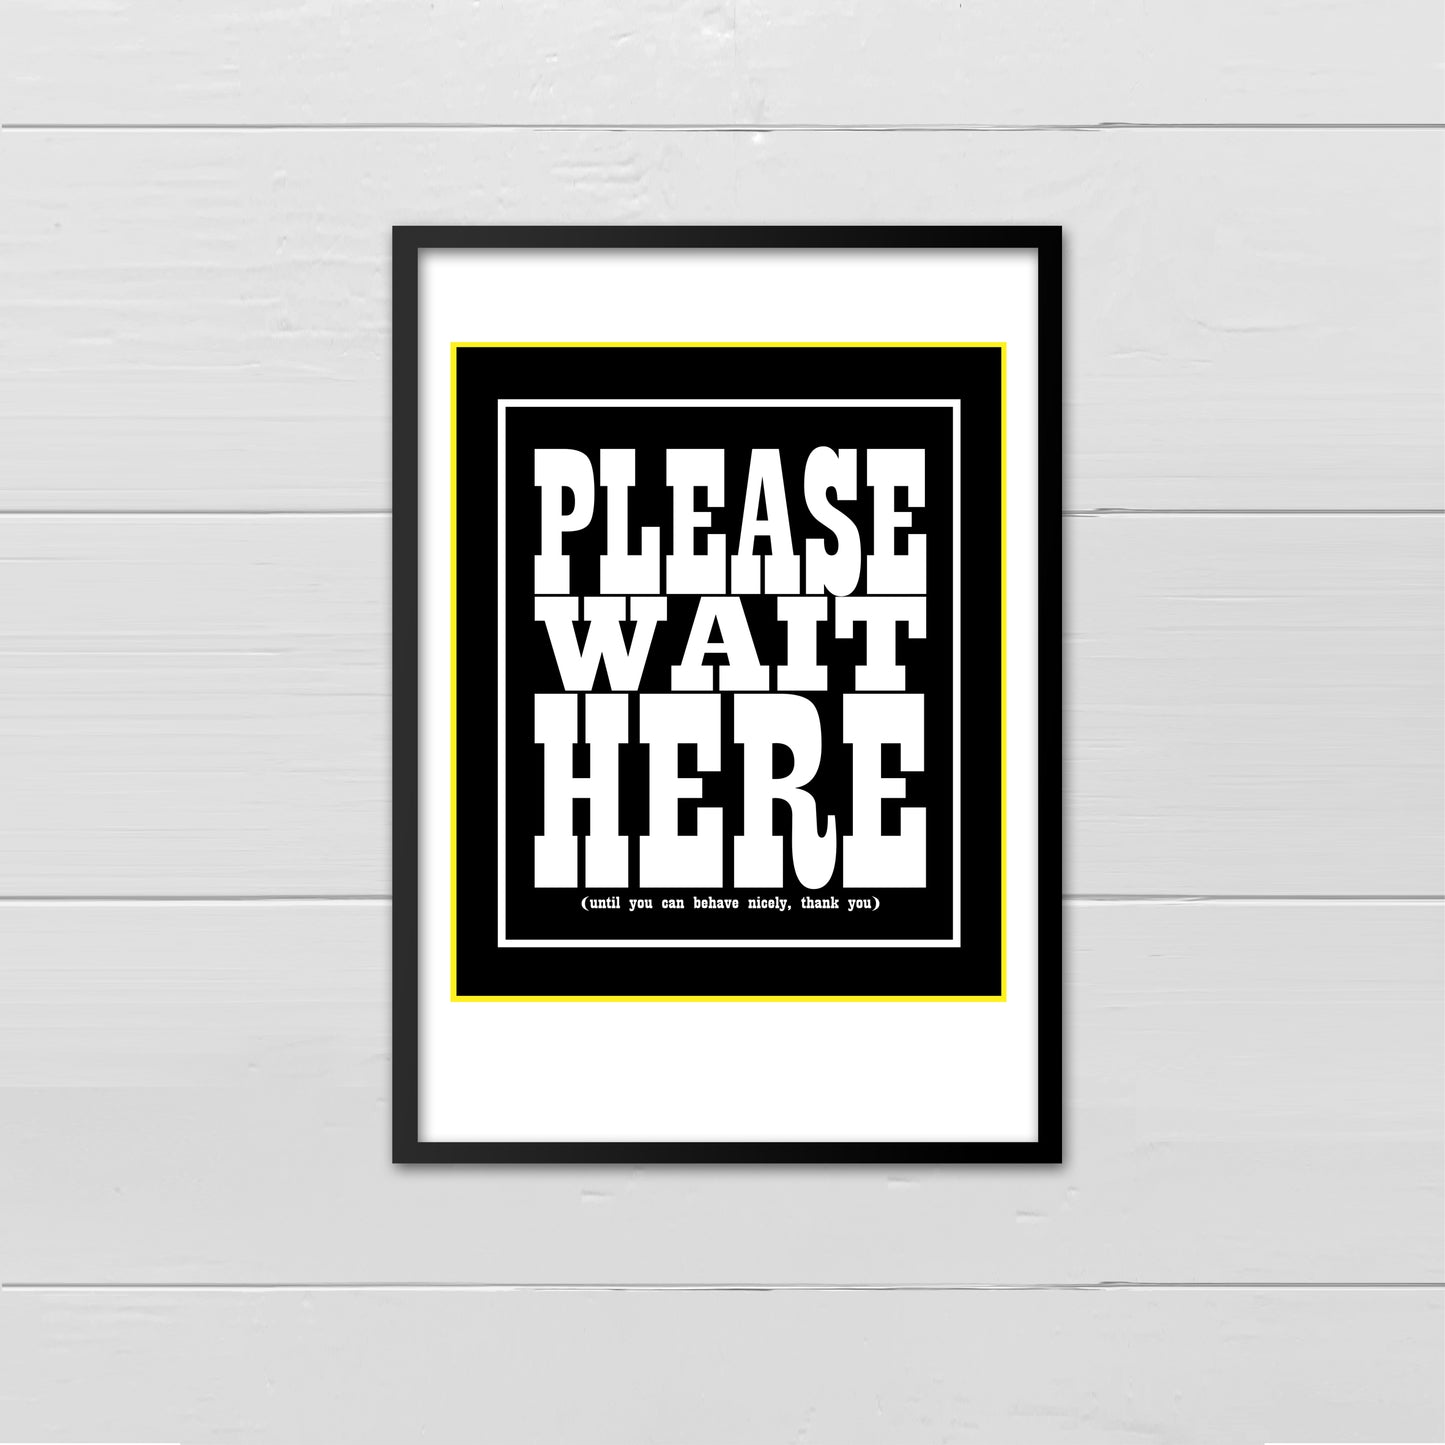 Please Wait Here.... white on black with yellow flash